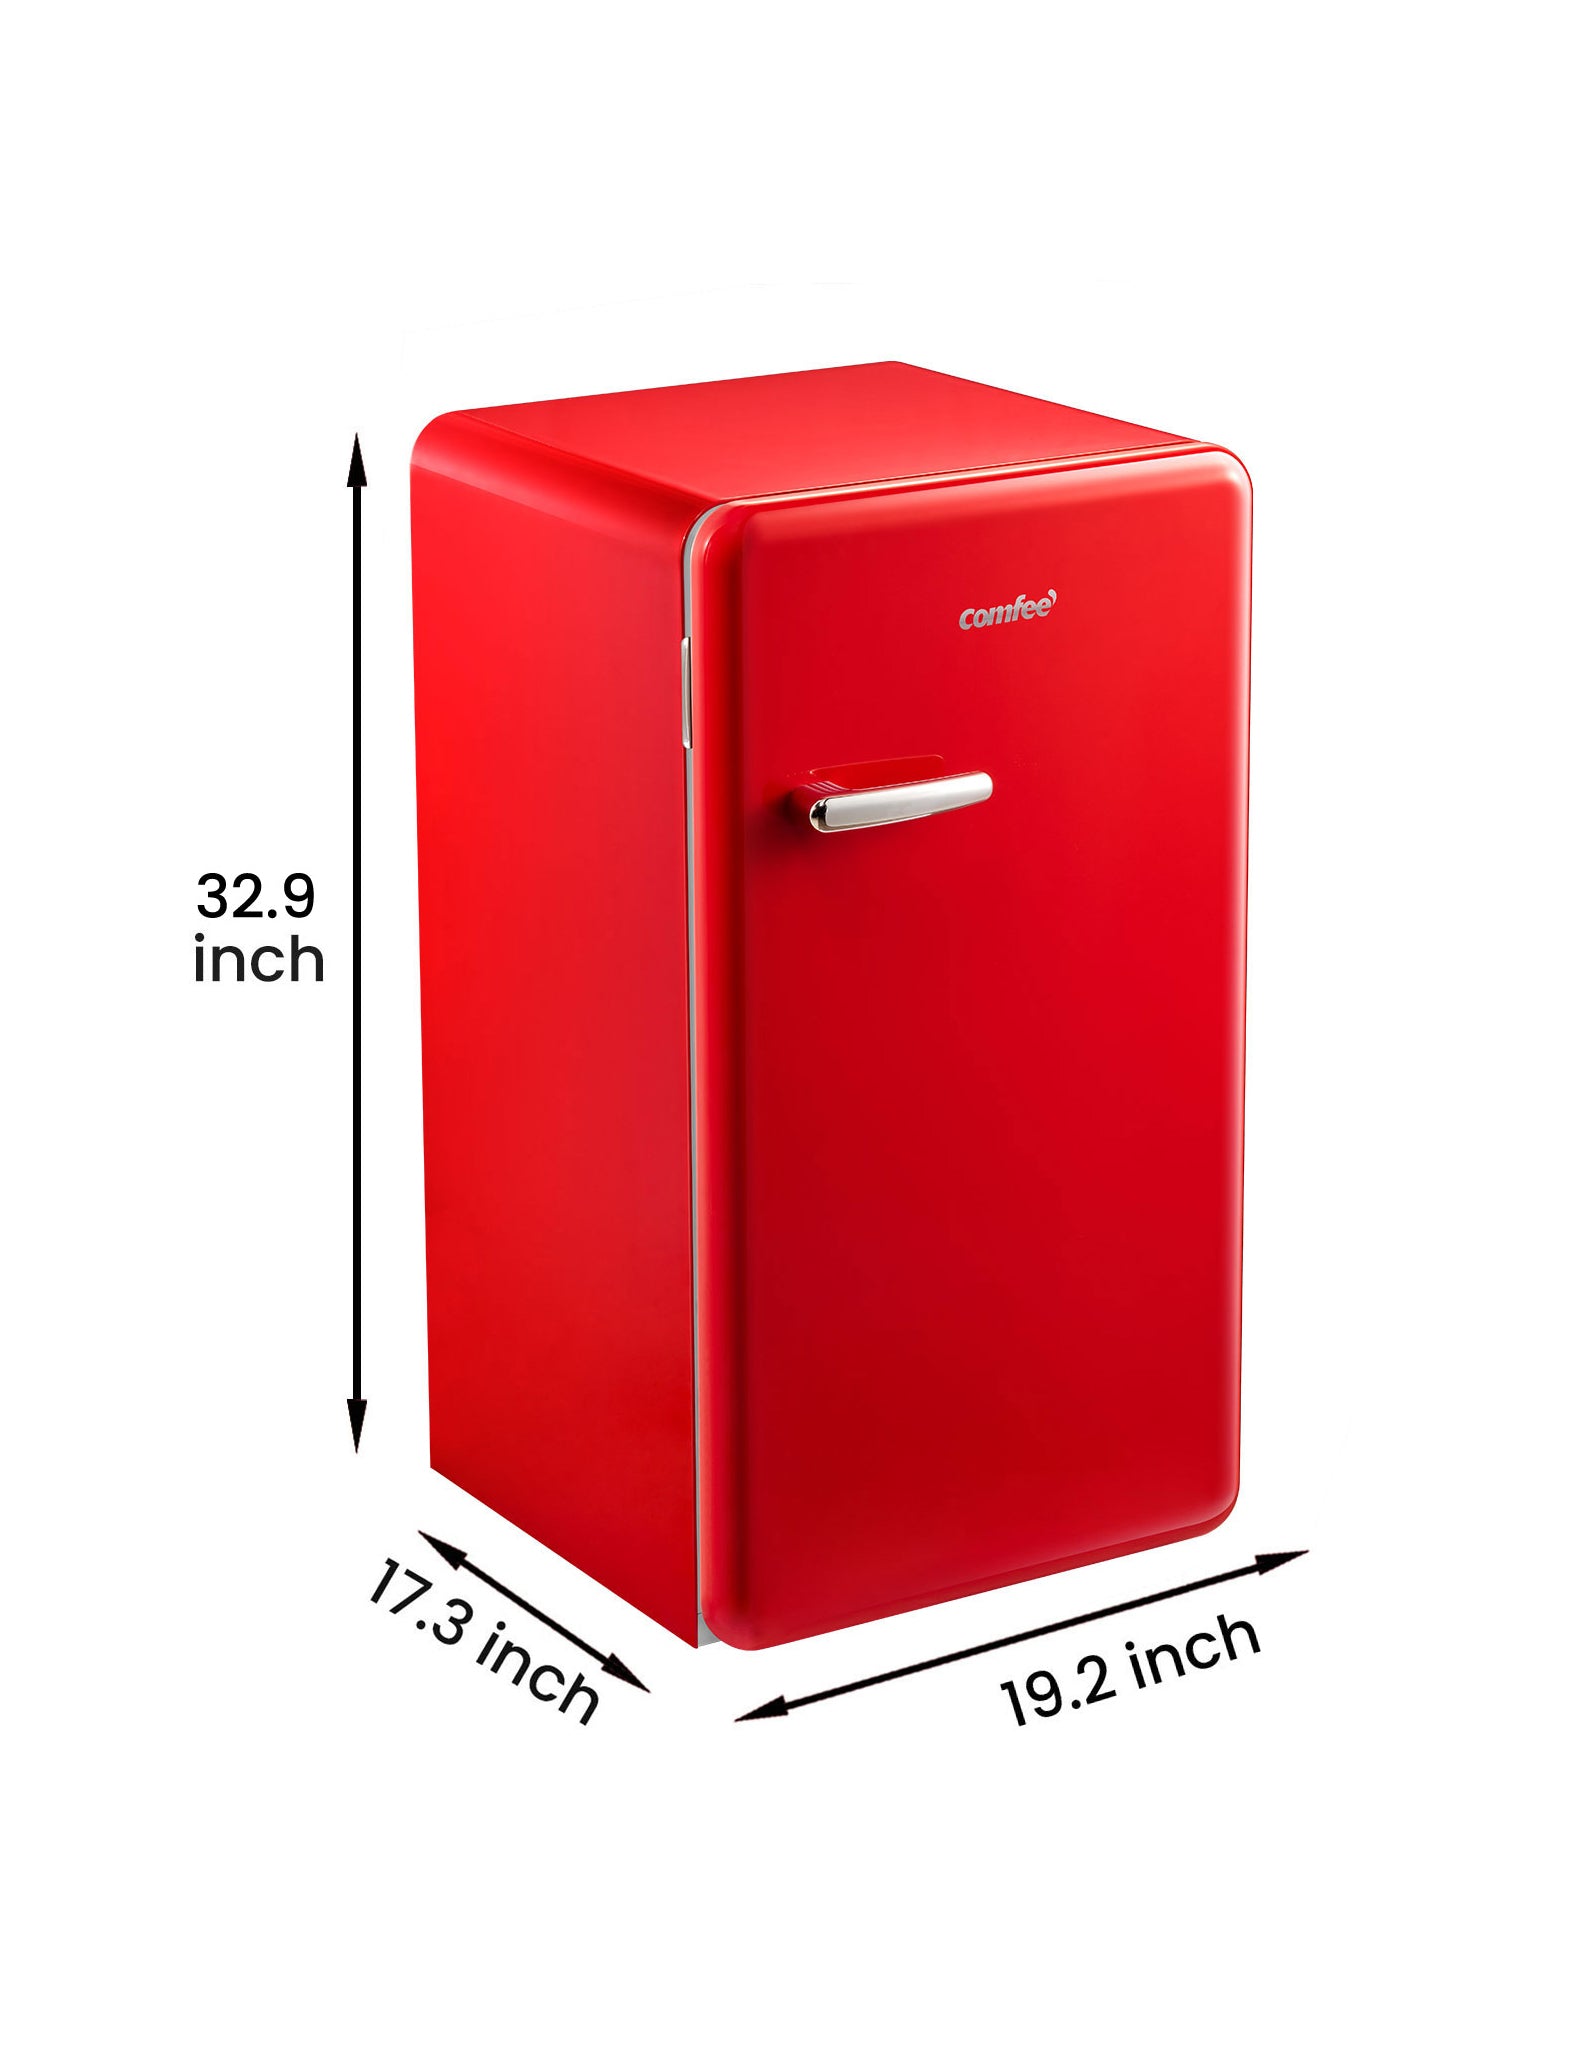 Compact Retro Style Refrigerator With Drinks Cooler - Comfee – Comfee